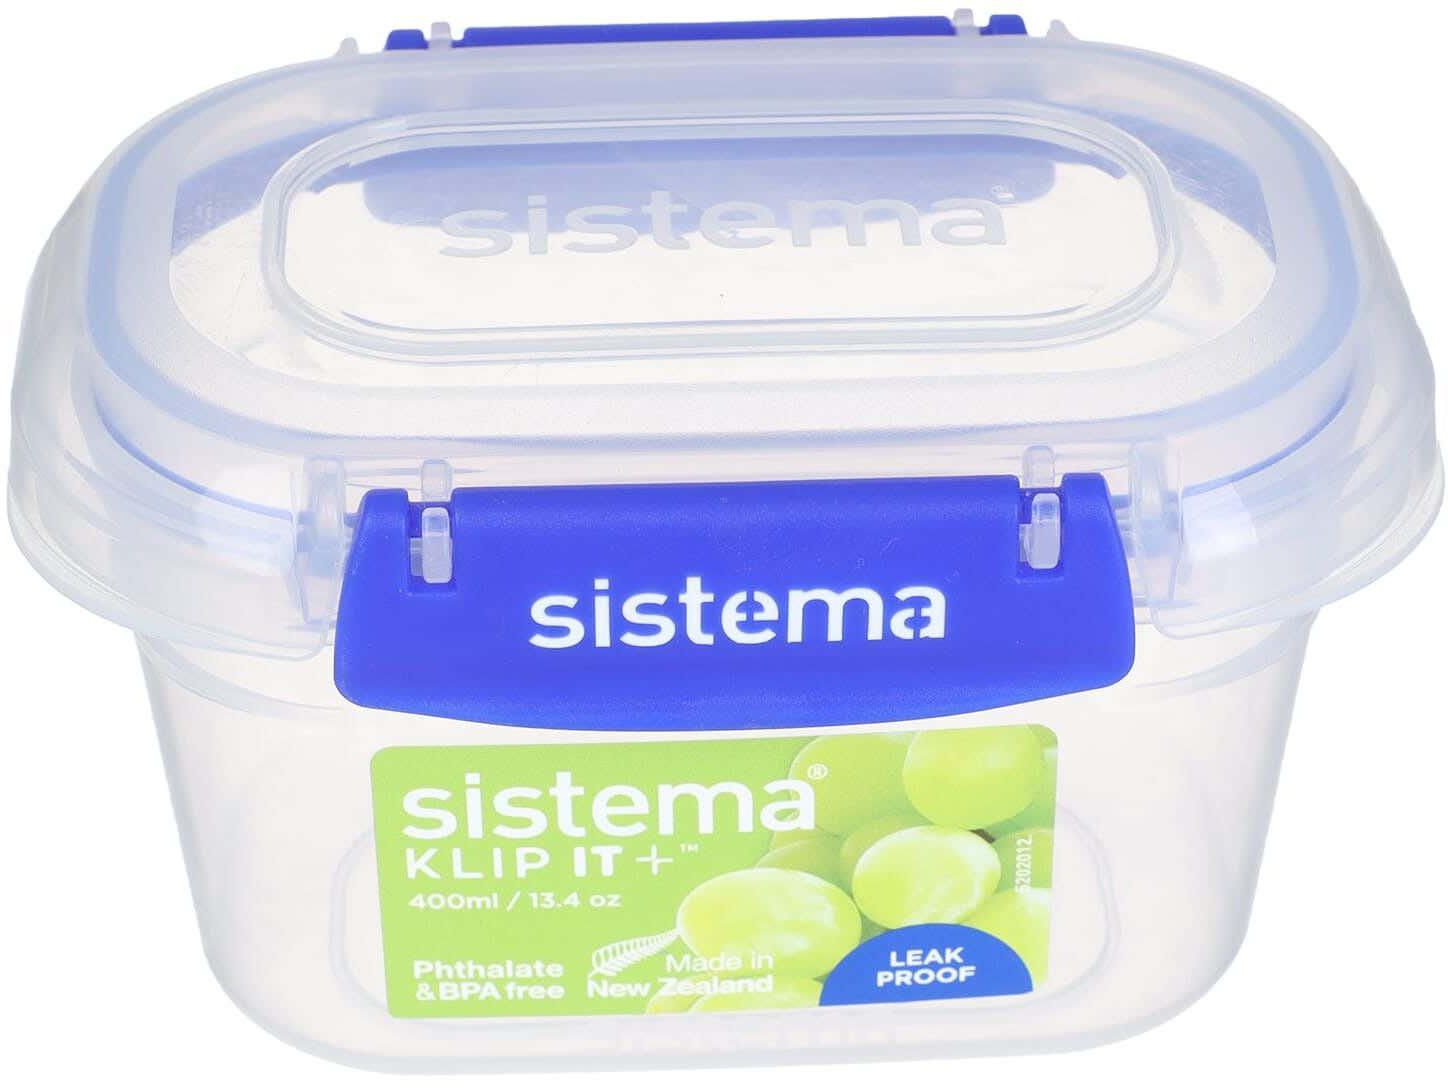 Get Sistema Plastic Food Container with Clip Cover, 400 ml - Blue with best offers | Raneen.com